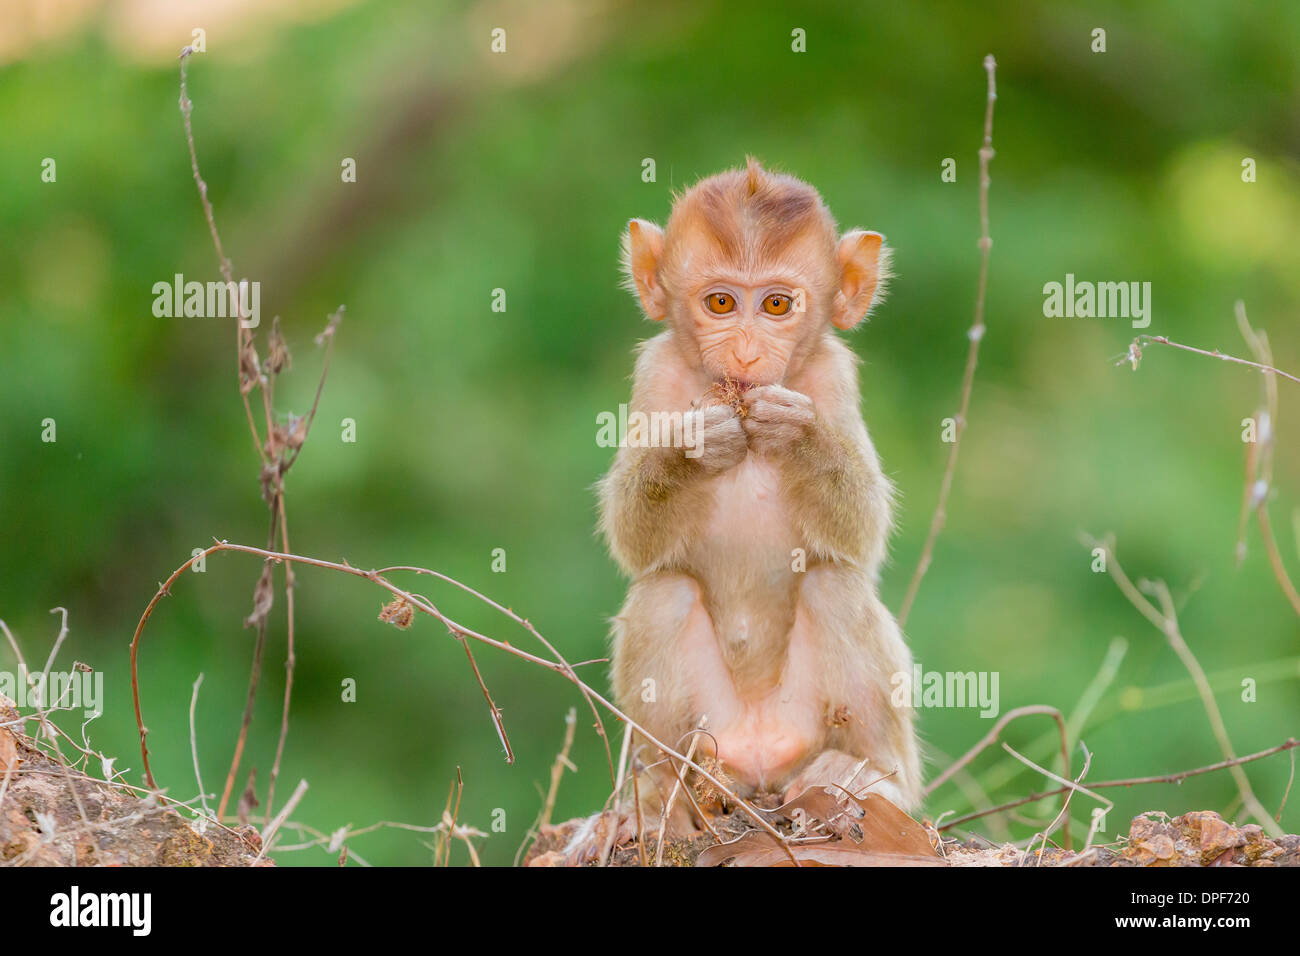 Young long-tailed macaque (Macaca fascicularis) in Angkor Thom, Siem Reap, Cambodia, Indochina, Southeast Asia, Asia Stock Photo